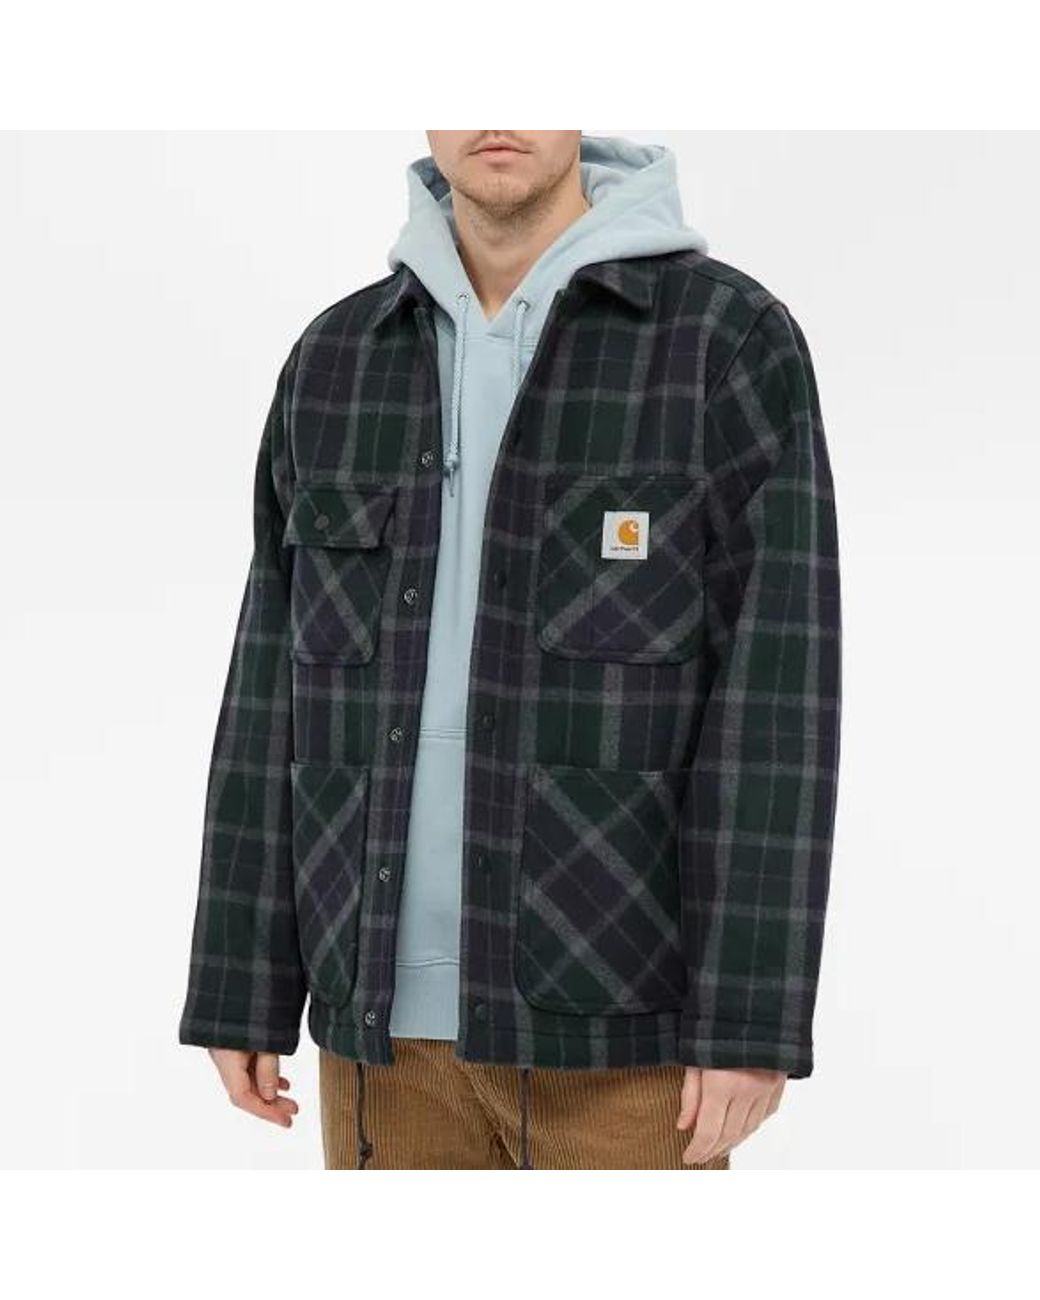 Carhartt WIP Blaine Check Jacket in Gray for Men | Lyst